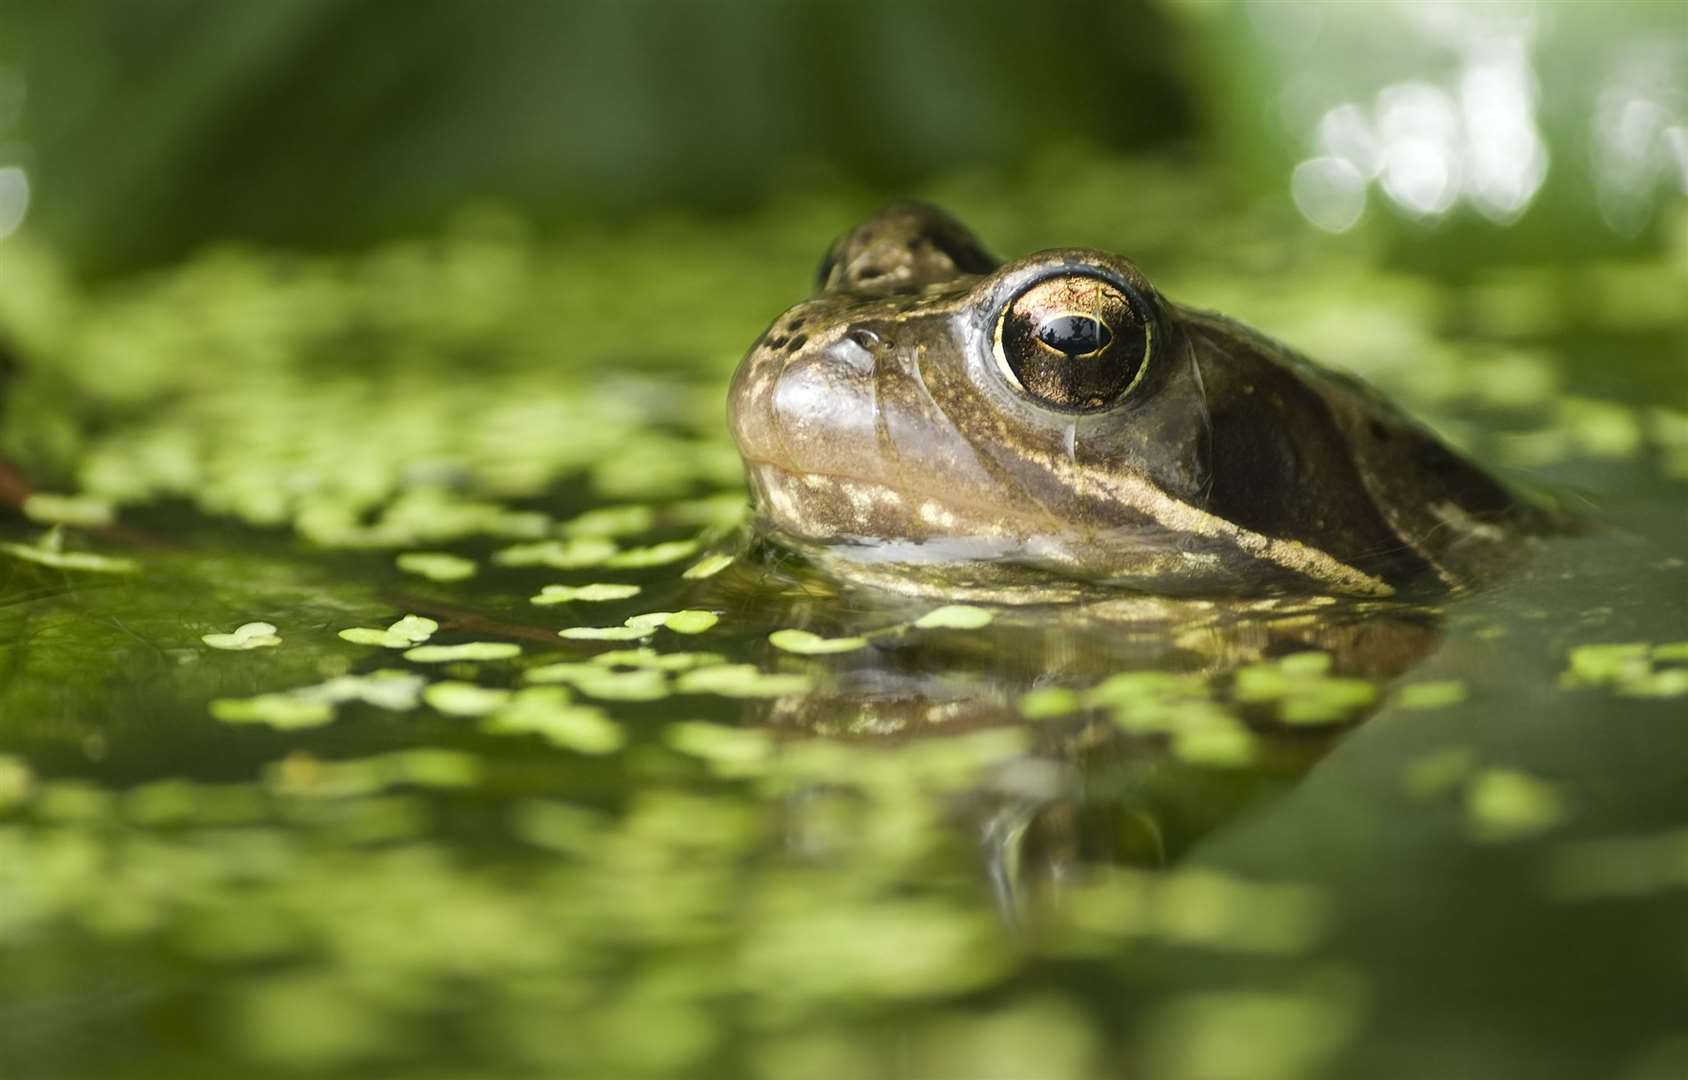 The welfare of animals, such as those in ponds, is protected under the rules. Image: iStock.